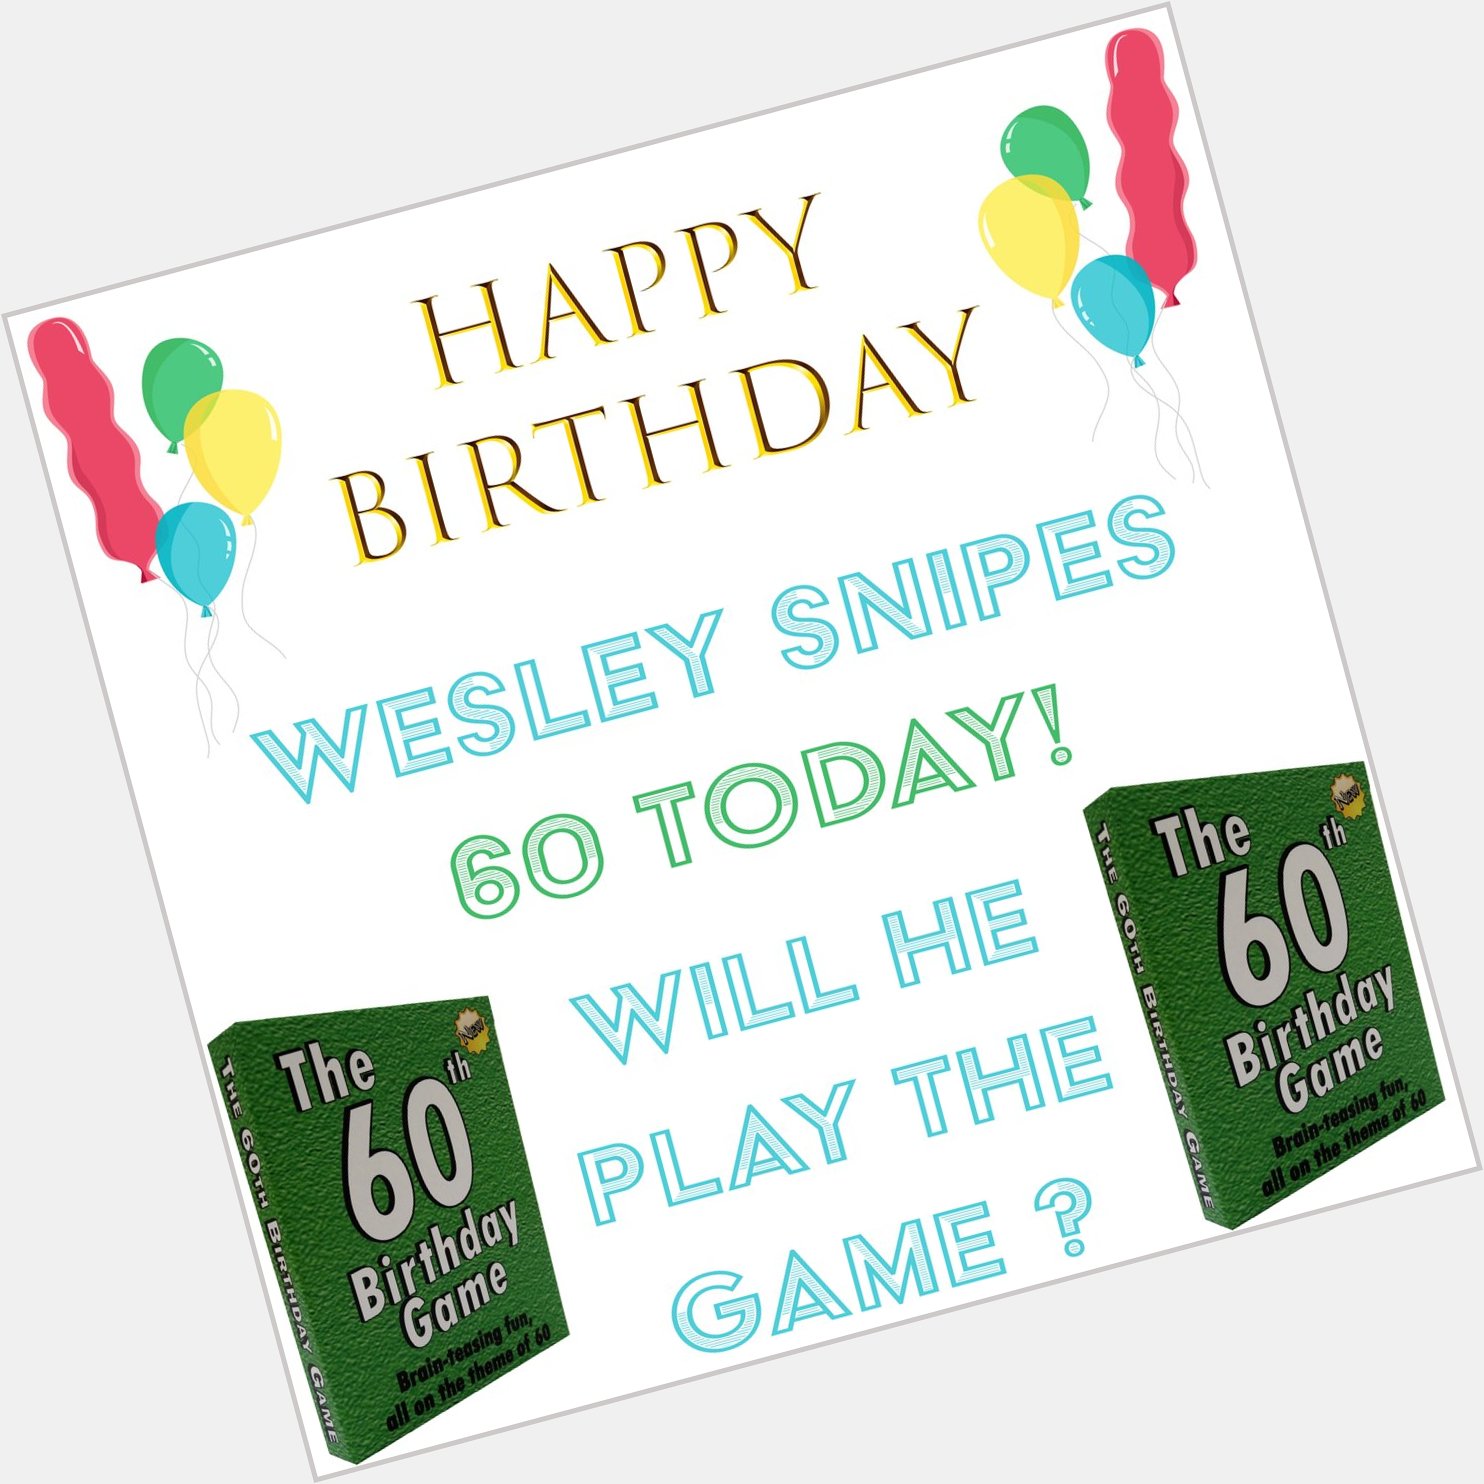 Happy birthday to the actor Wesley Snipes 